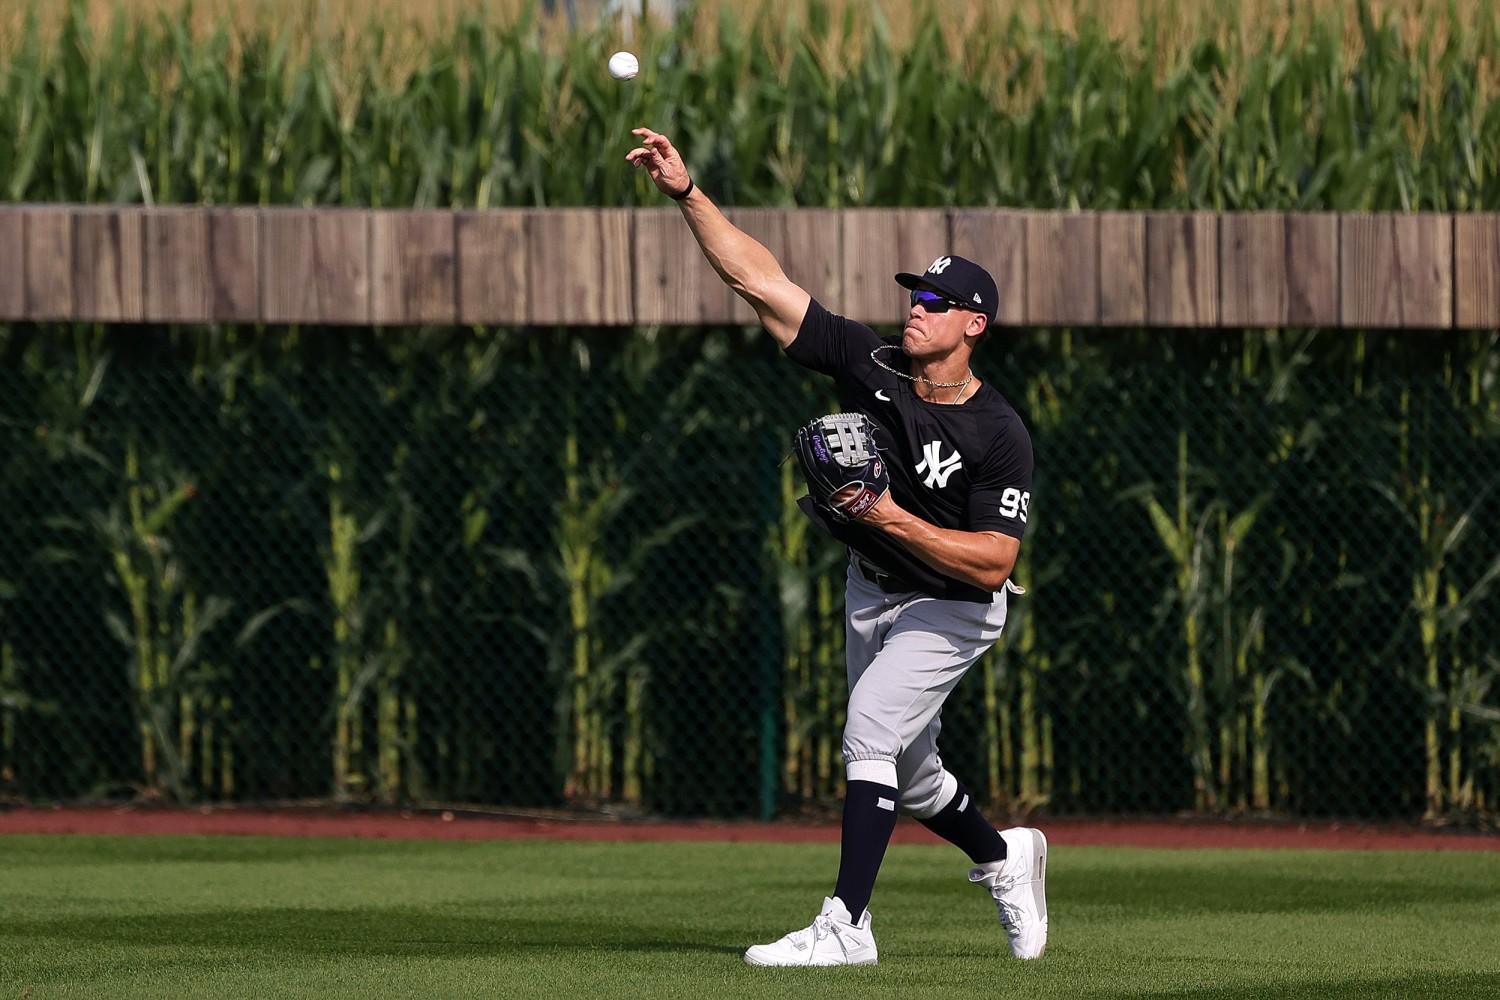 Yankees-White Sox 'Field of Dreams' Game Photos - The Best Photos from the ' Field of Dreams' Game